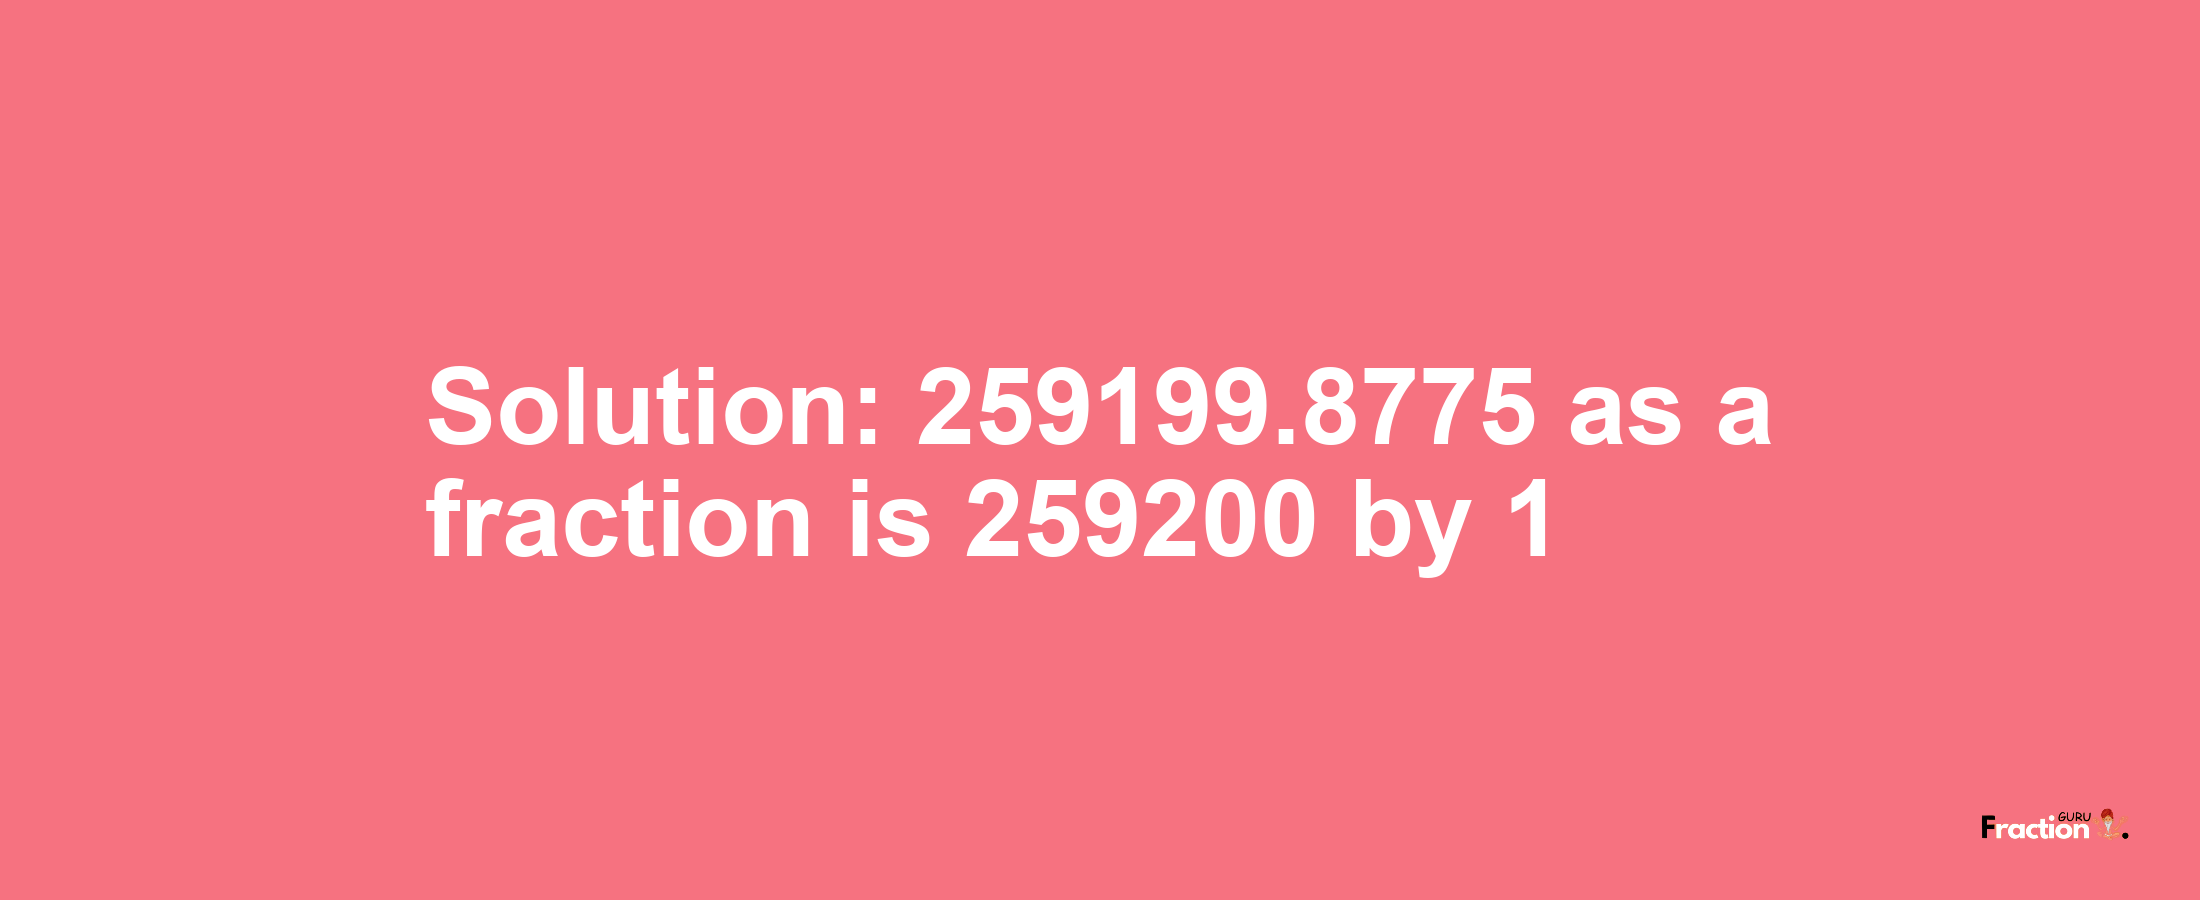 Solution:259199.8775 as a fraction is 259200/1